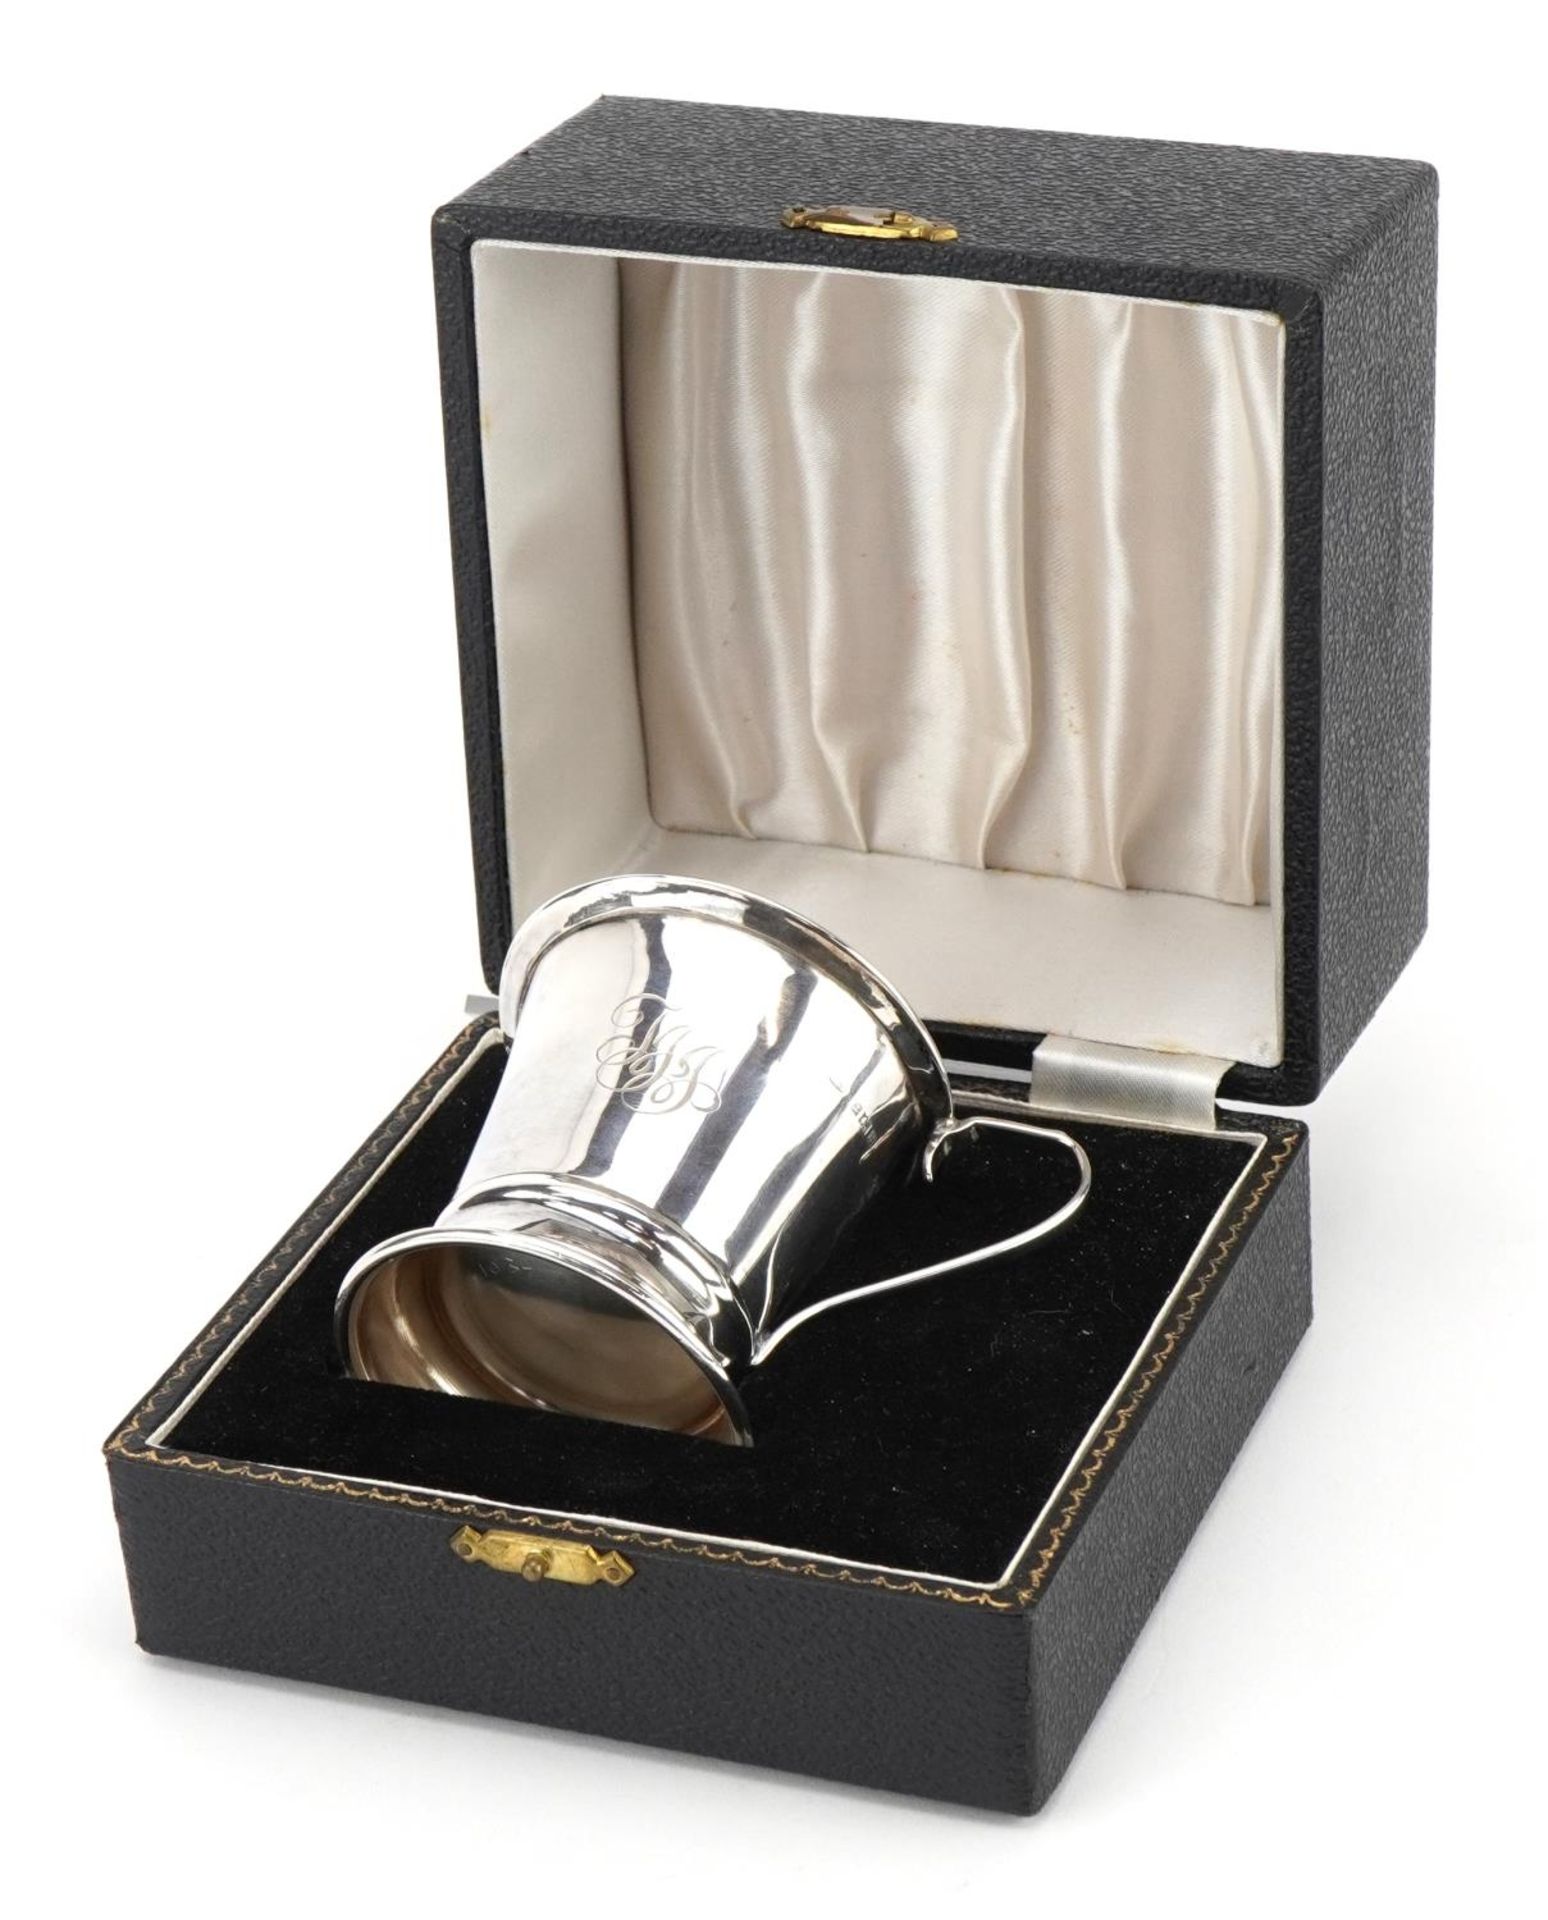 W I Broadway & Co, Elizabeth II silver christening tankard with gilt interior housed in a fitted - Image 6 of 6